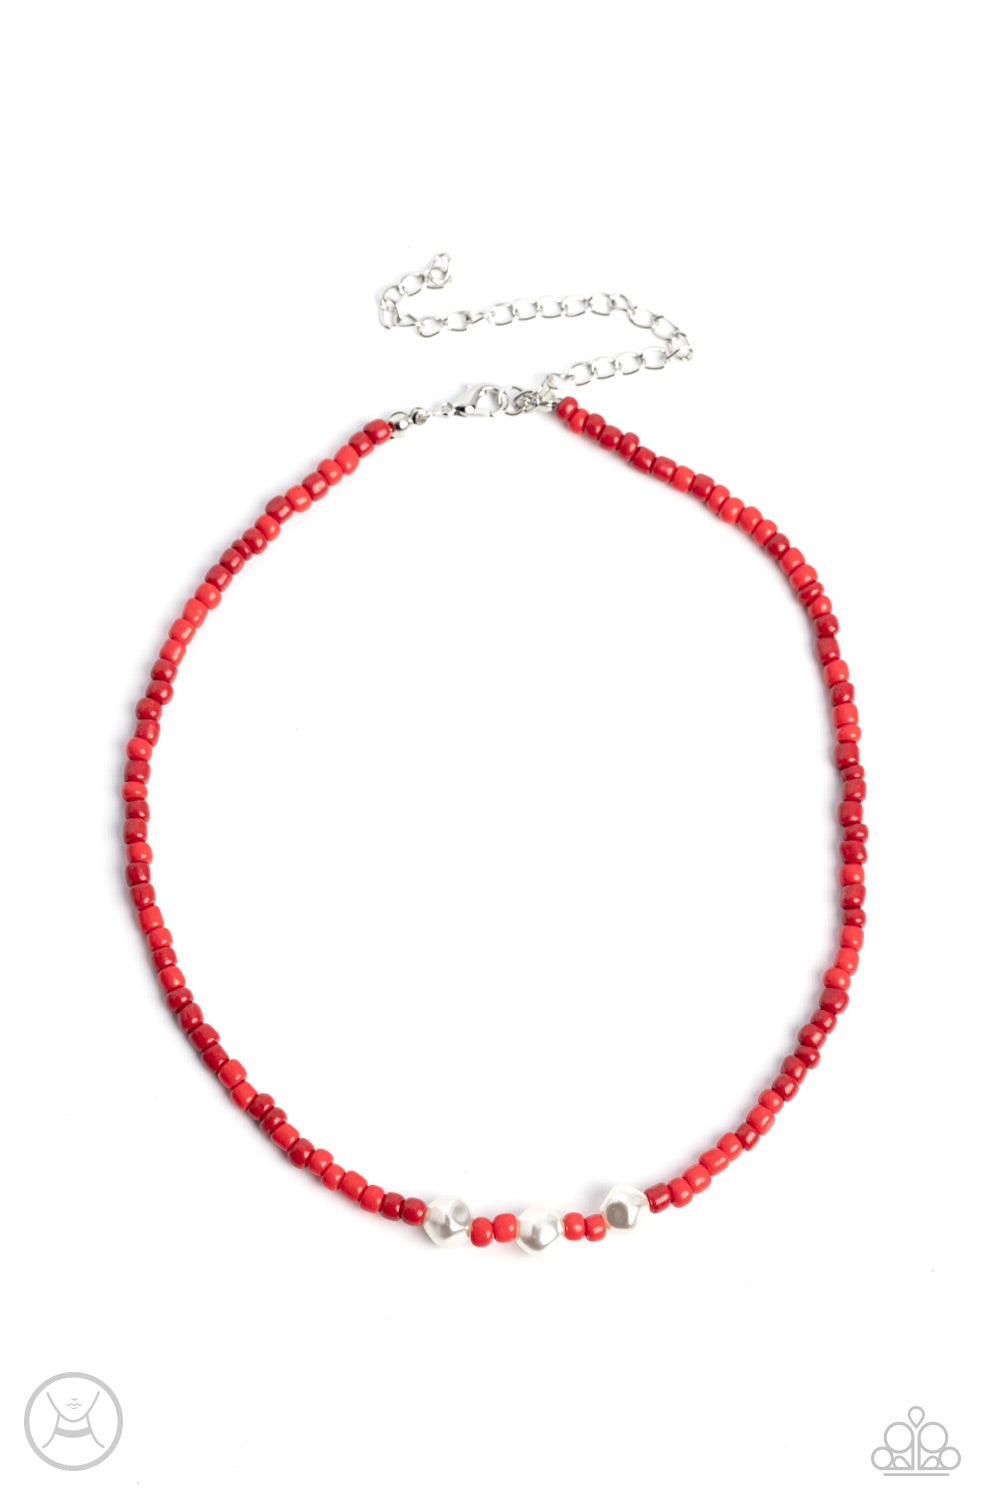 I Can SEED Clearly Now - Red Seed Bead & White Pearl Paparazzi Choker Necklace & matching earrings